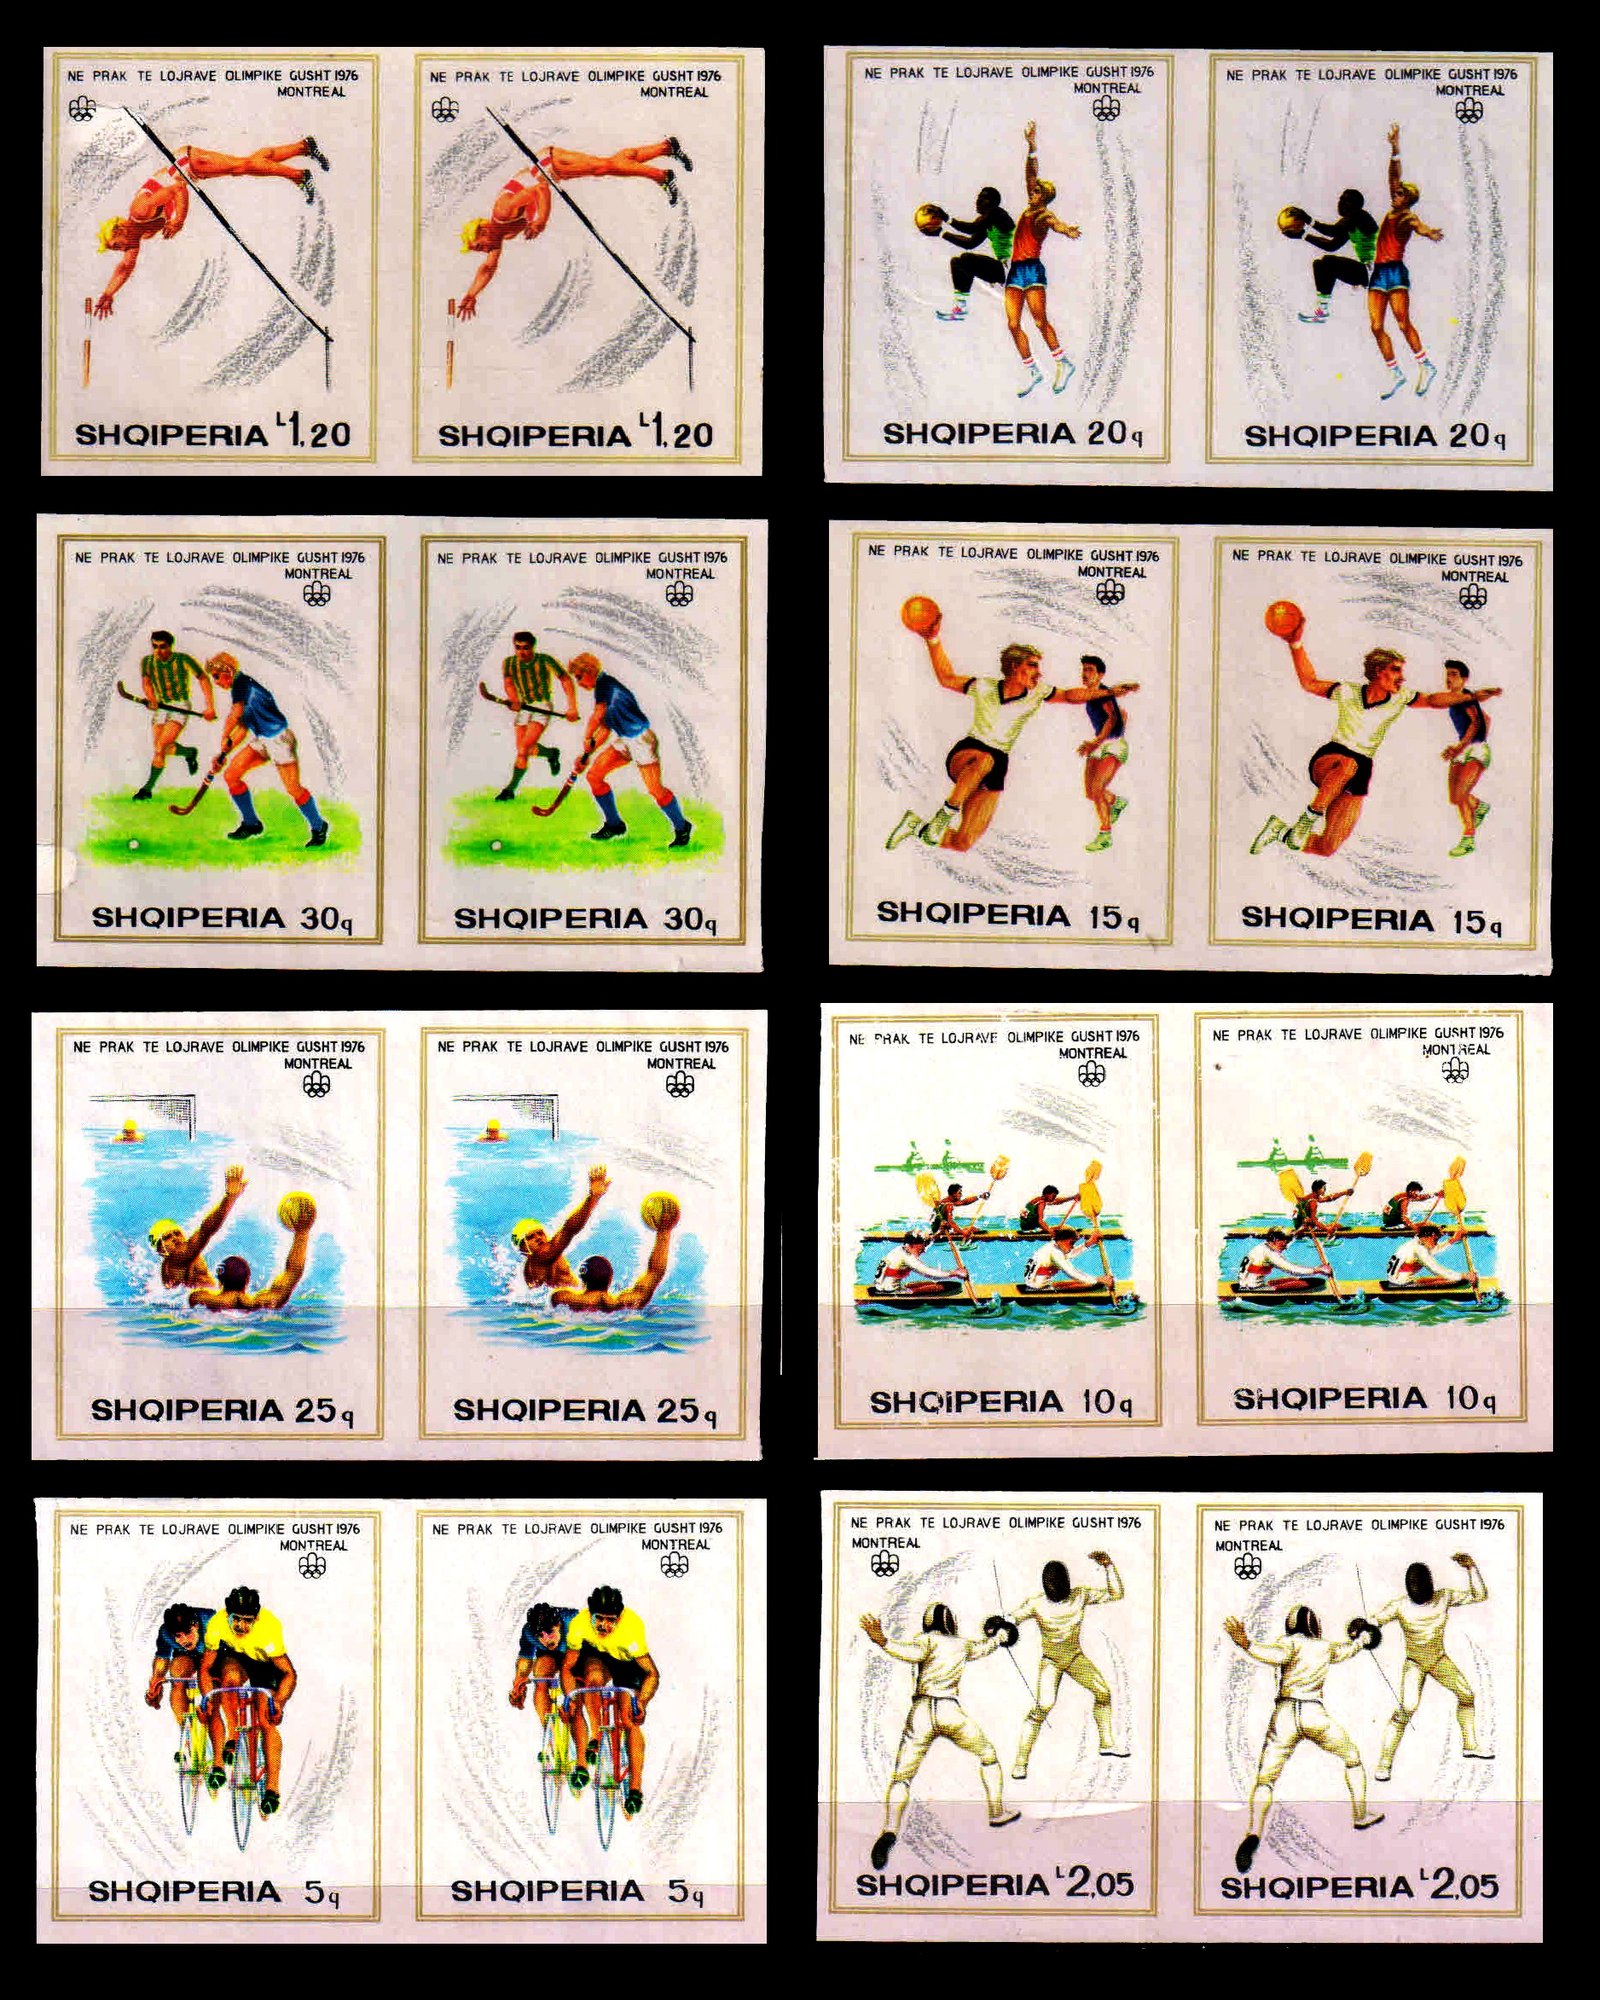 ALBANIA 1975 - Olympic Games. Montreal, Hockey, Cycling, Water Polo, Basket Ball. Imperf Set of 8 Pairs, Mint Gum Wash. S.G. 1785-1792